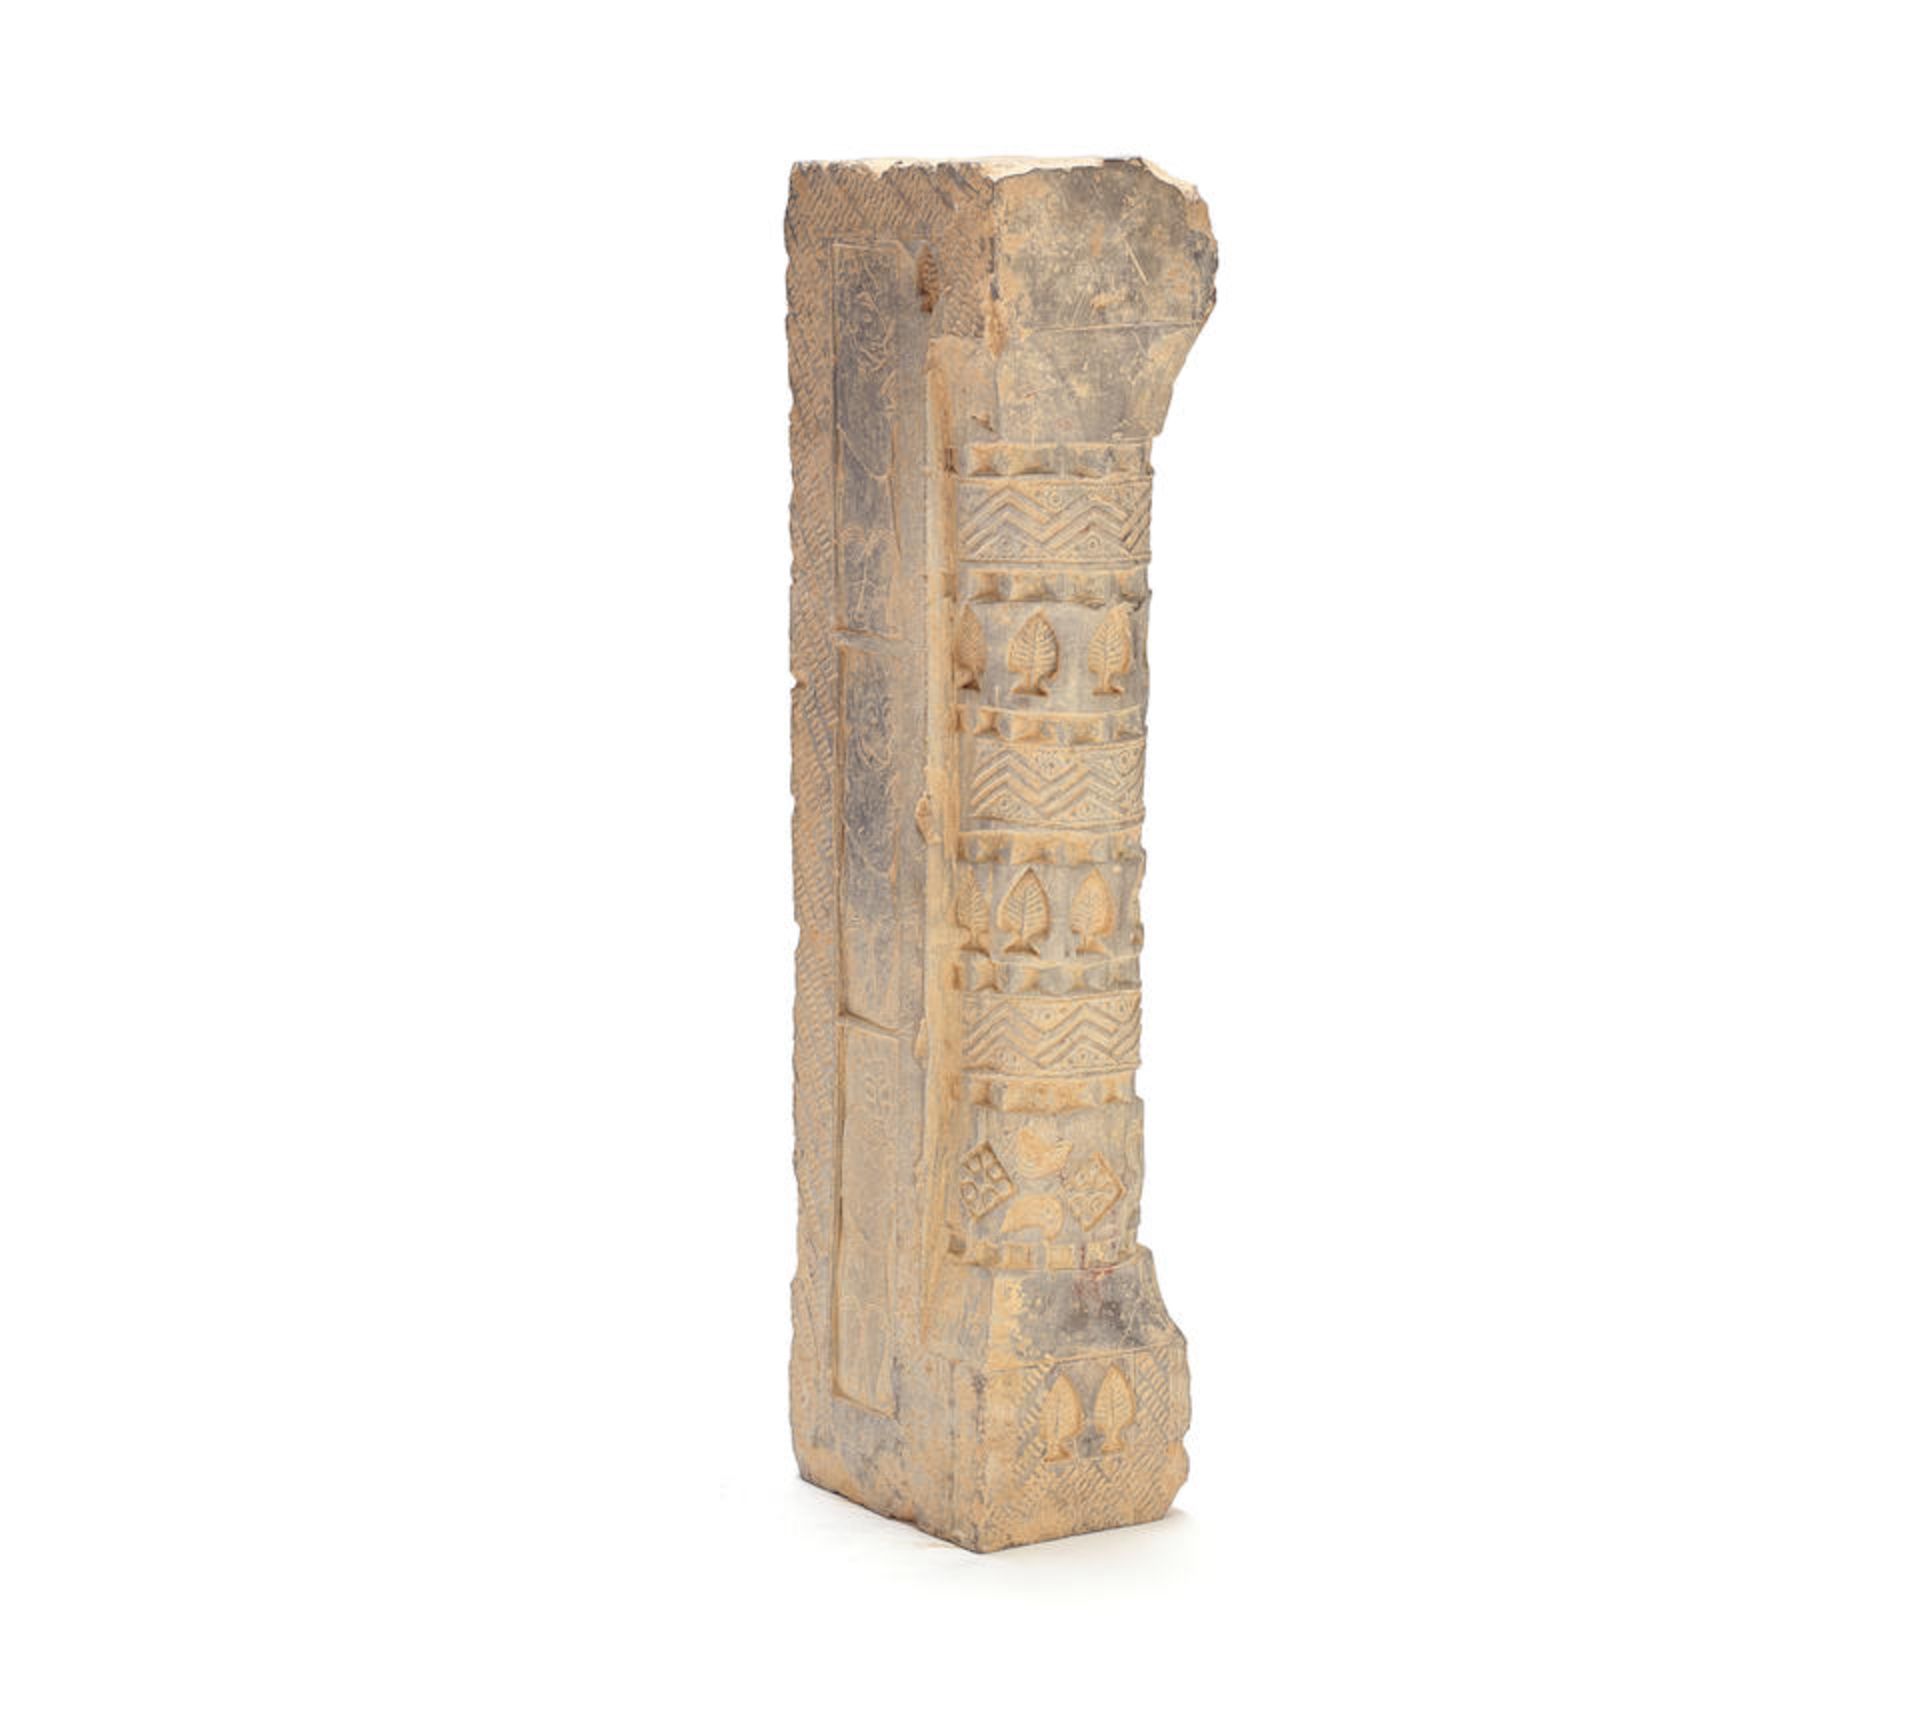 A POTTERY TOMB PILASTER Han Dynasty